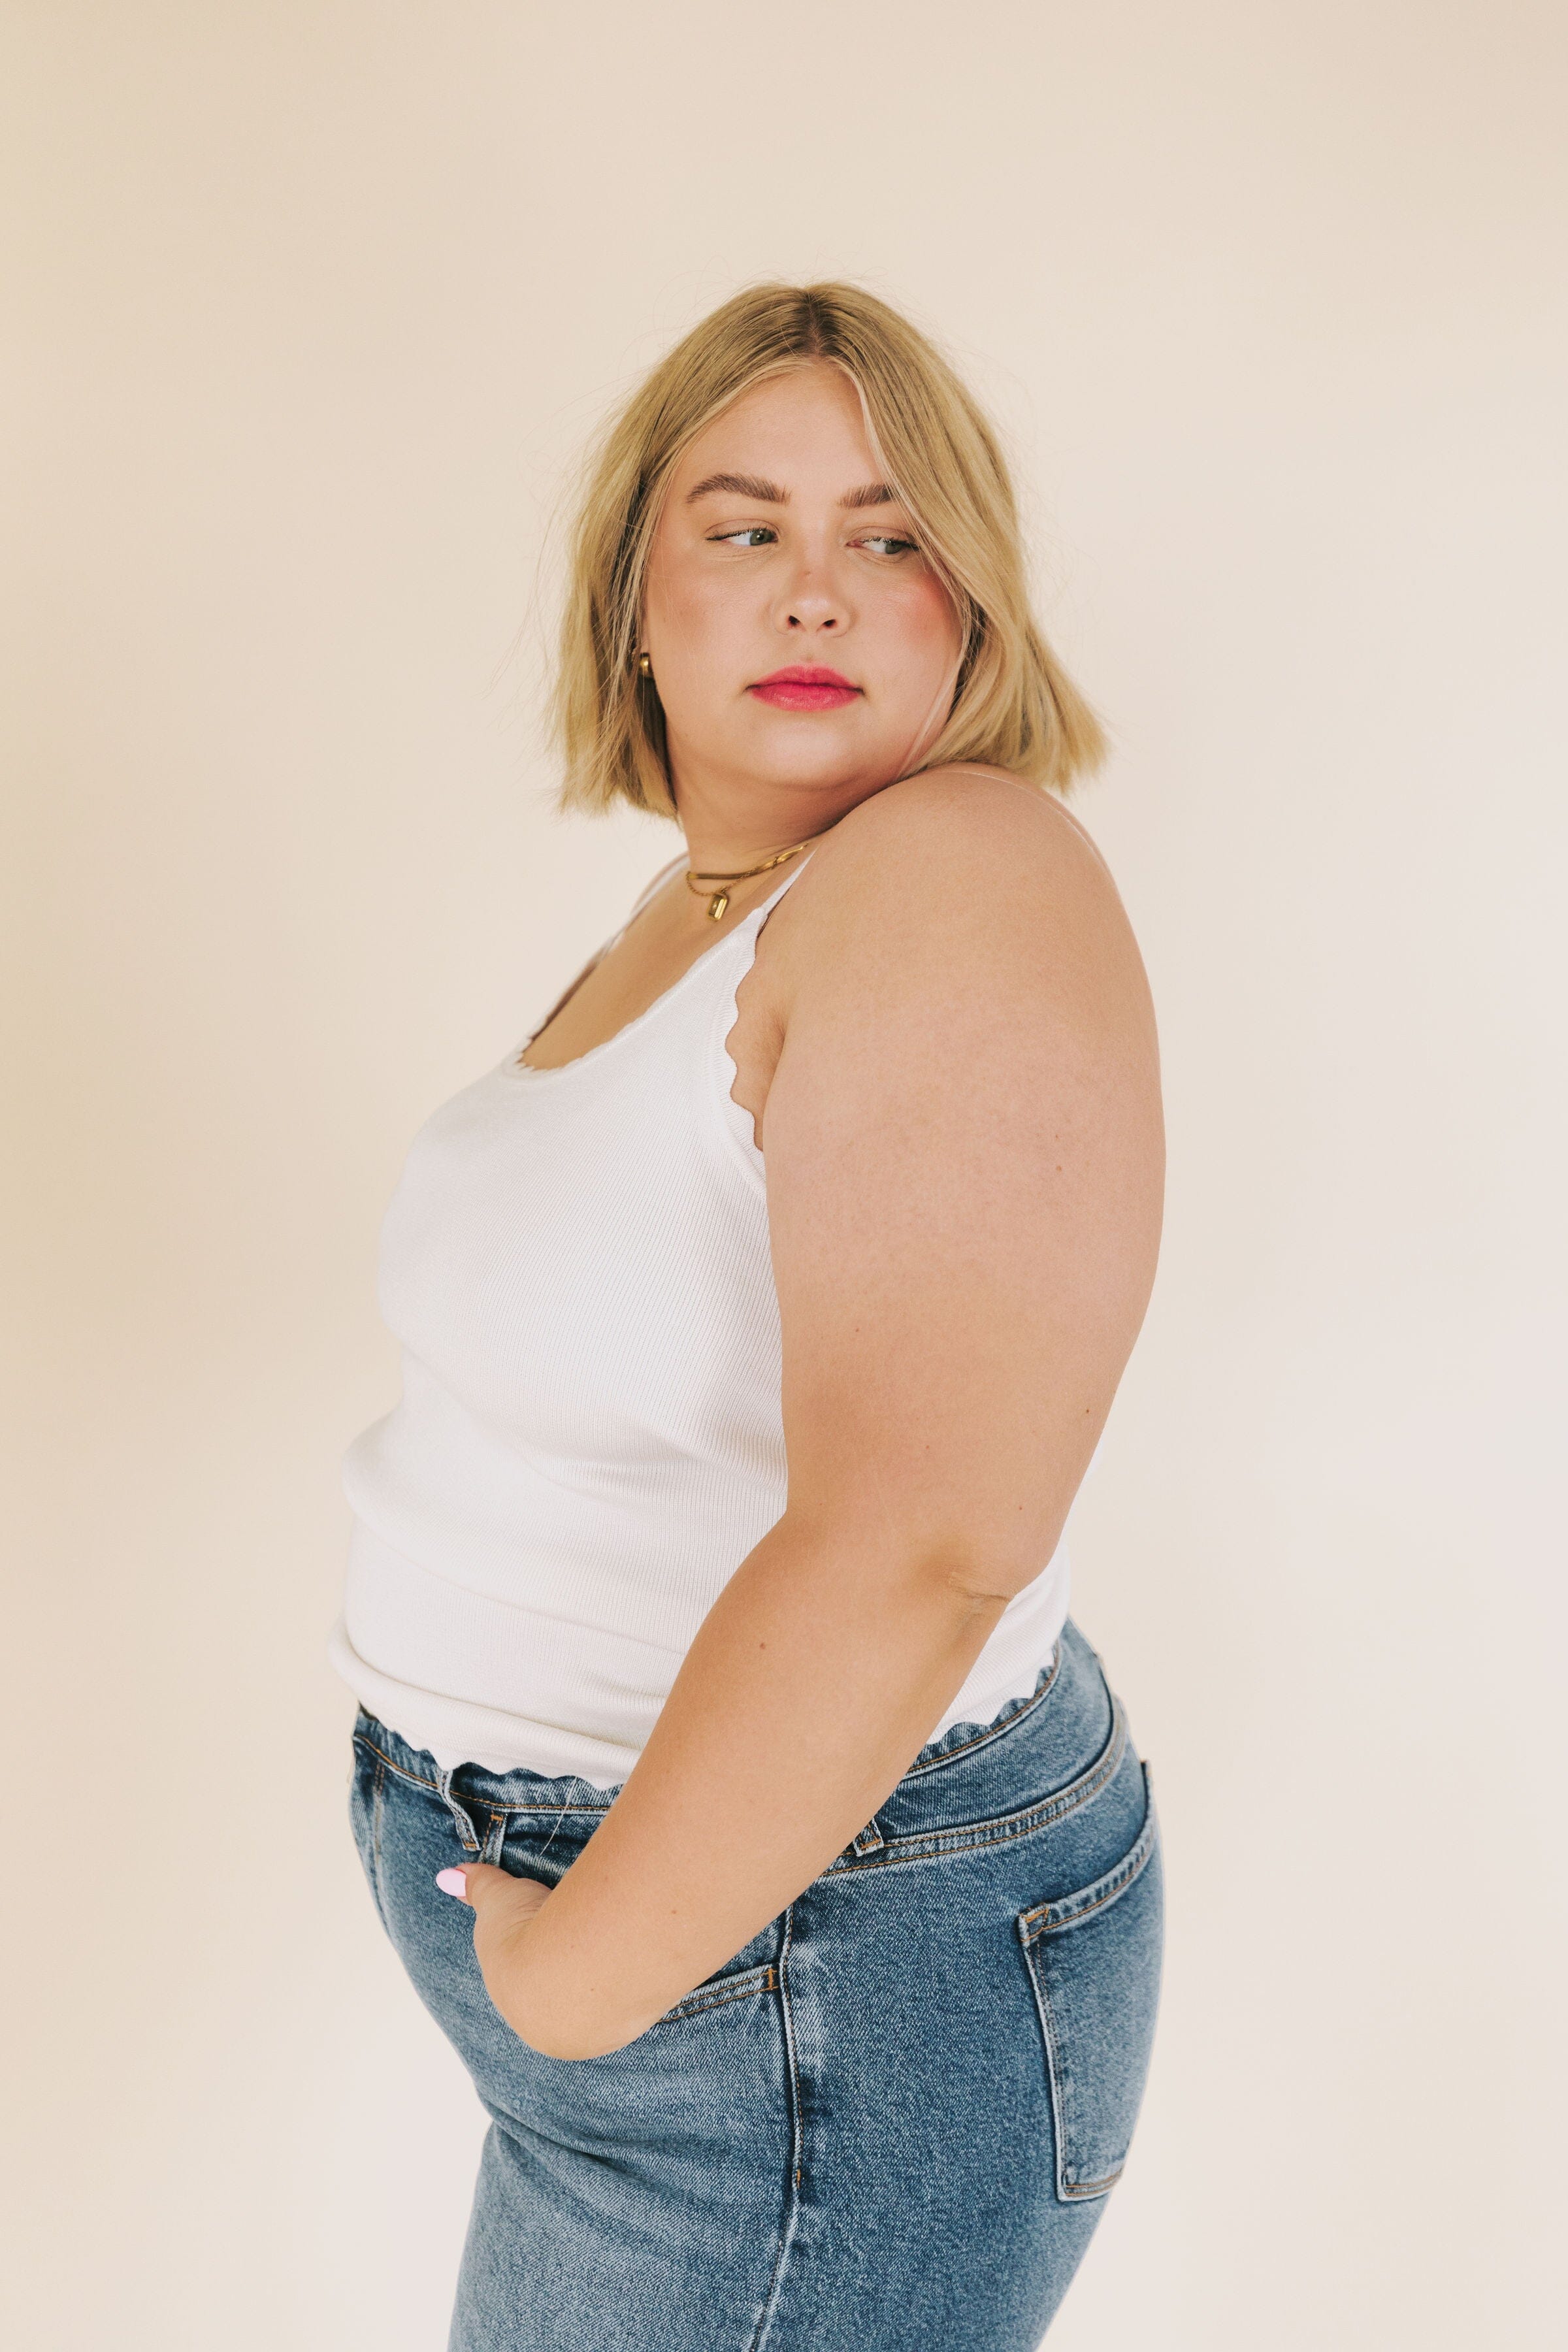 PLUS SIZE - Simply Chic Tank Top